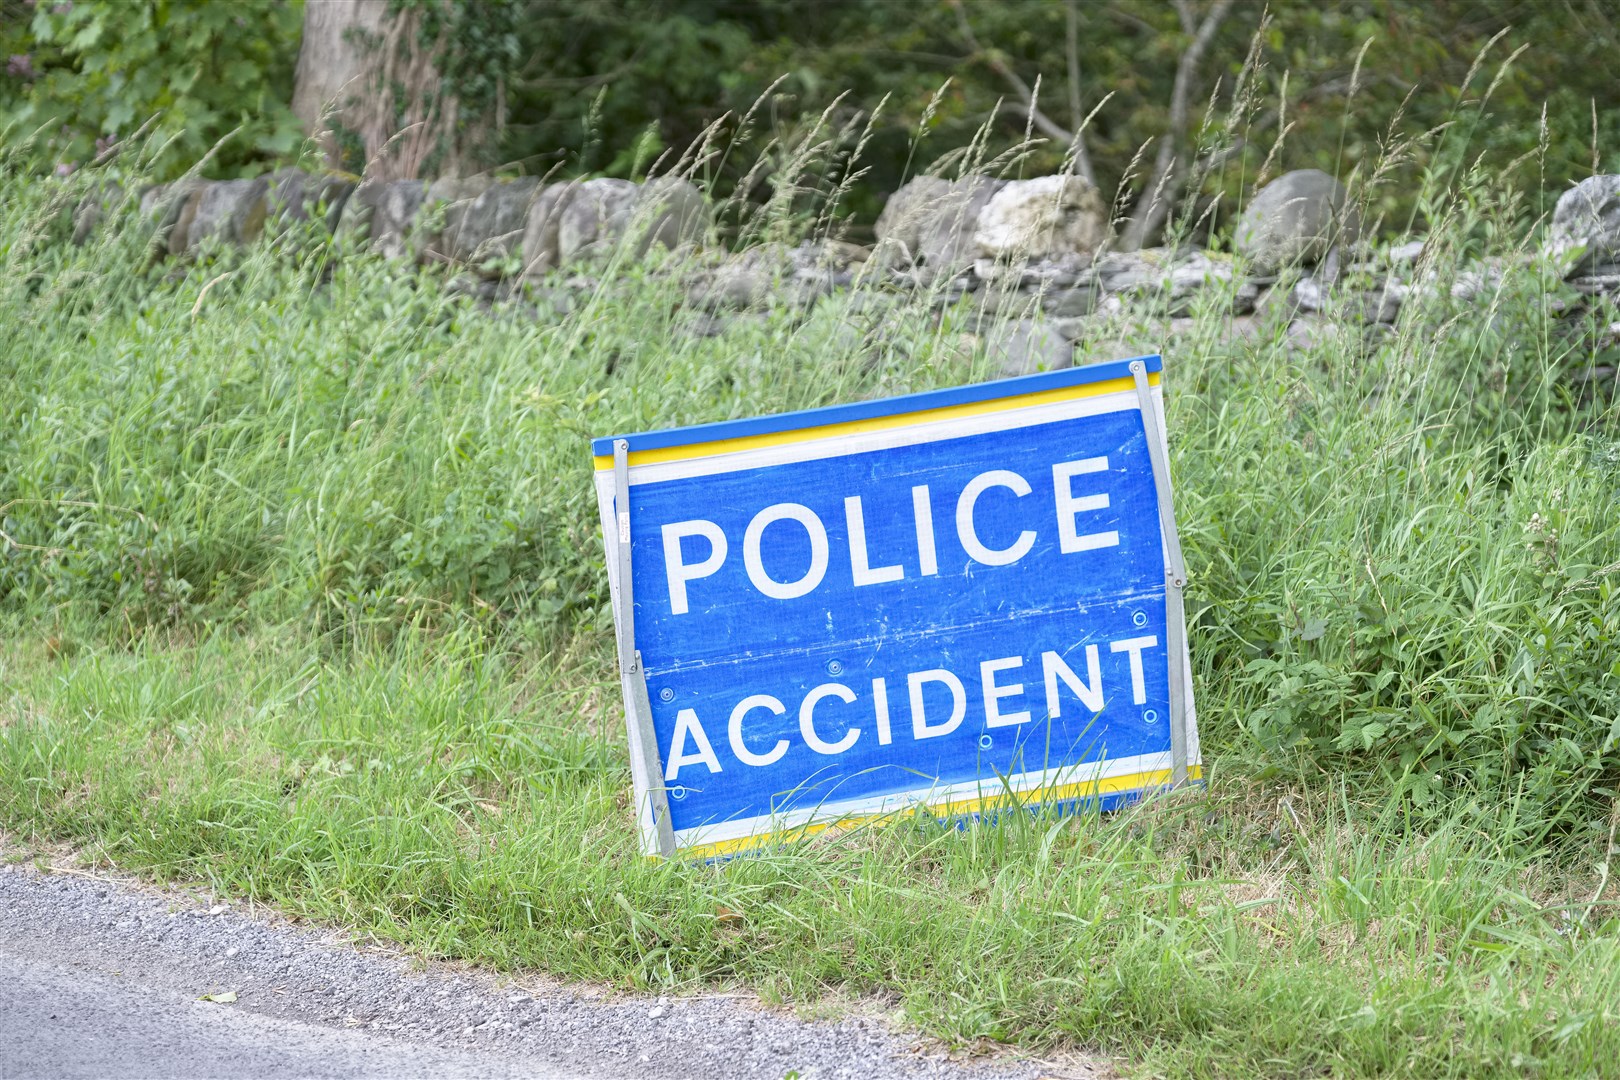 Police accident sign at road crash in rural countryside blind bend